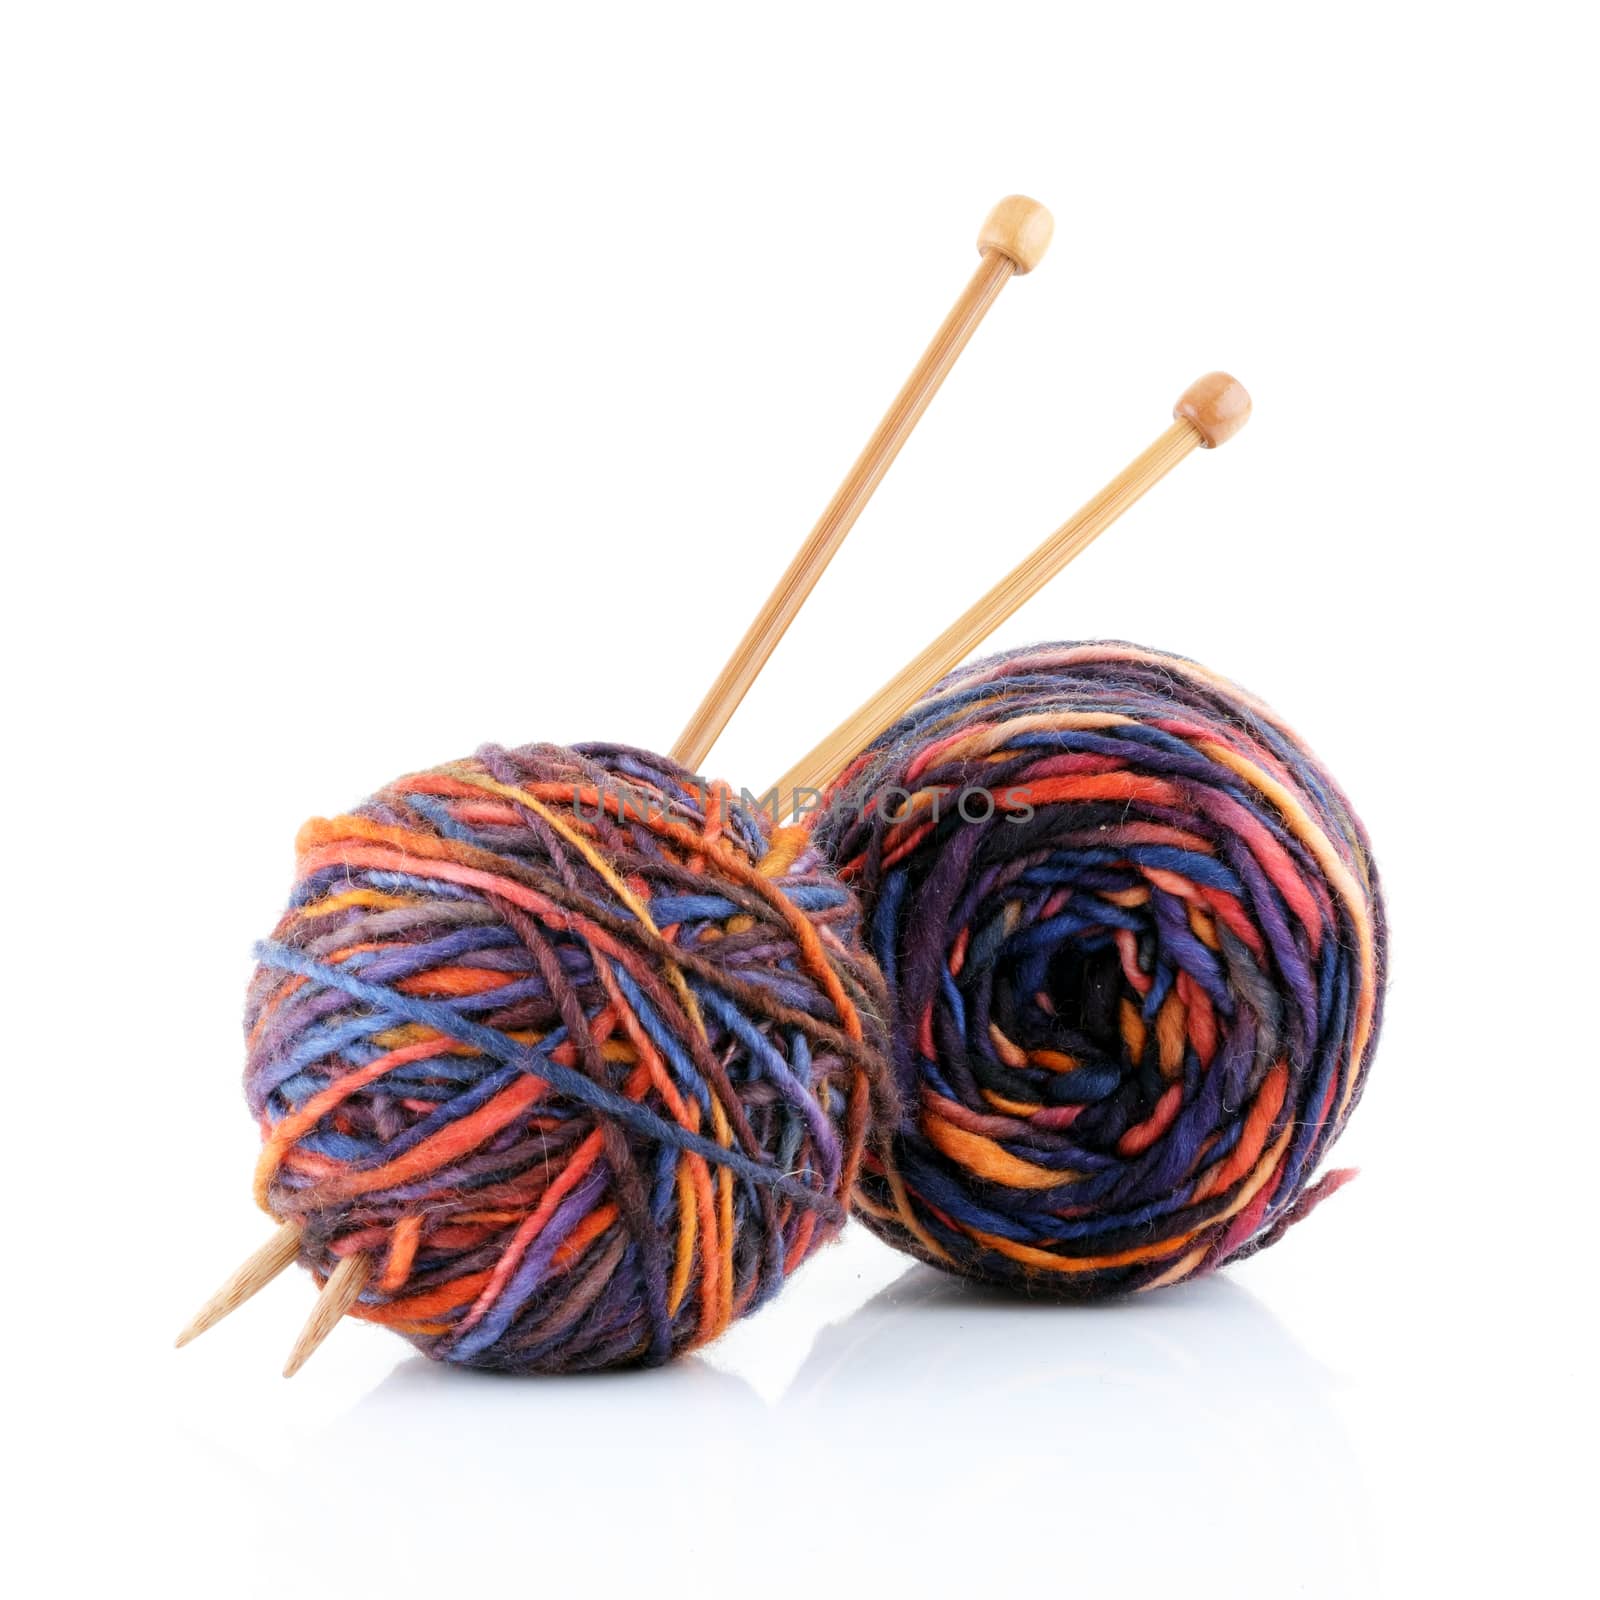 Two balls of wool with knitting needles by VivacityImages